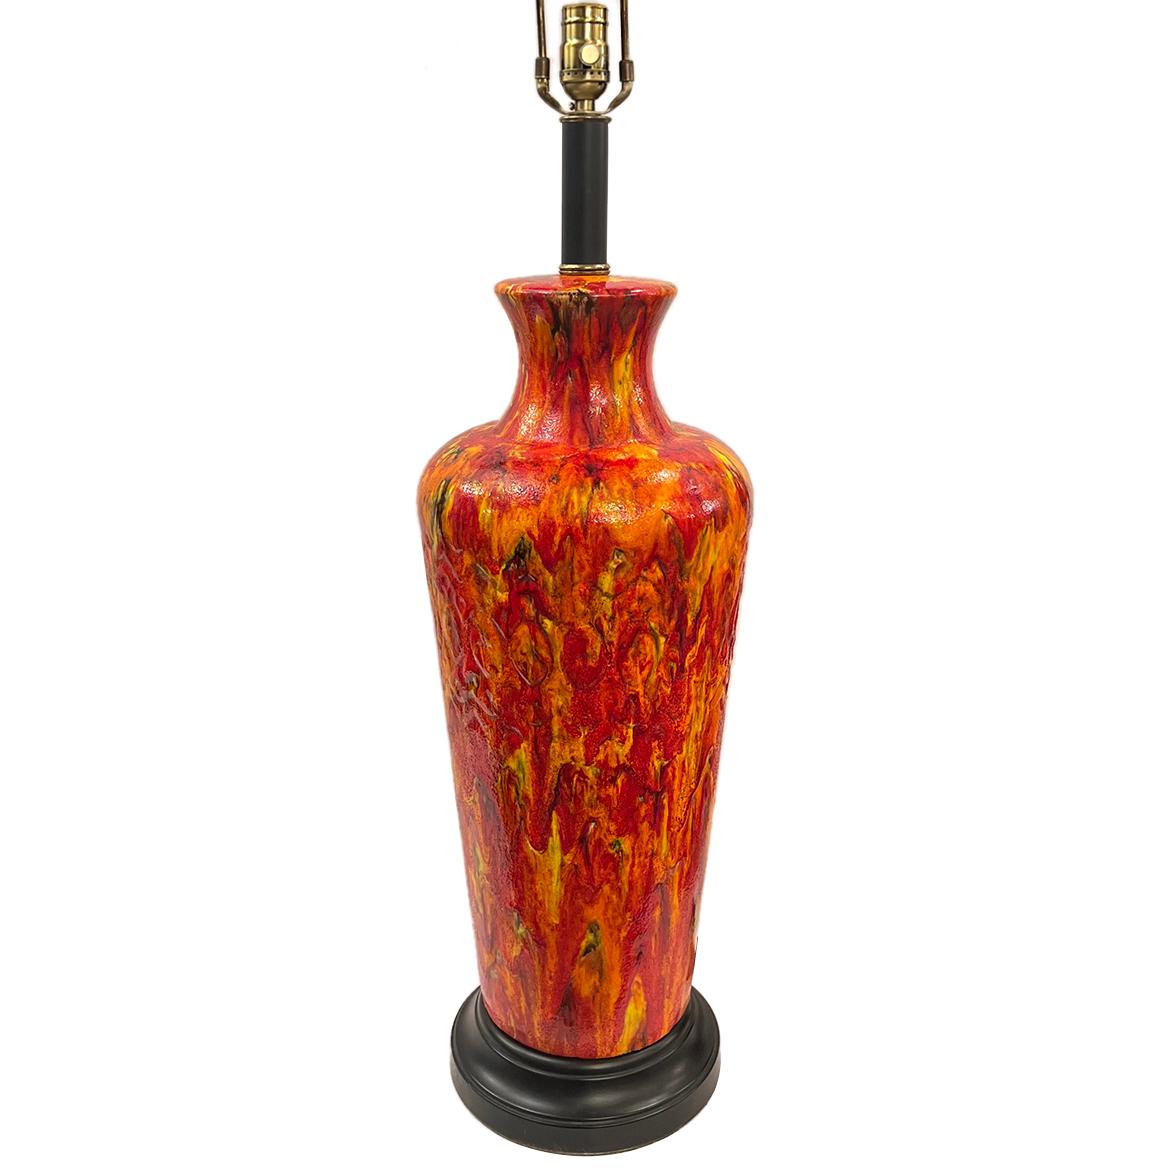 A large Italian circa 1960's porcelain table lamp with orange glazed decoration.

Measurements:
Height of body:27